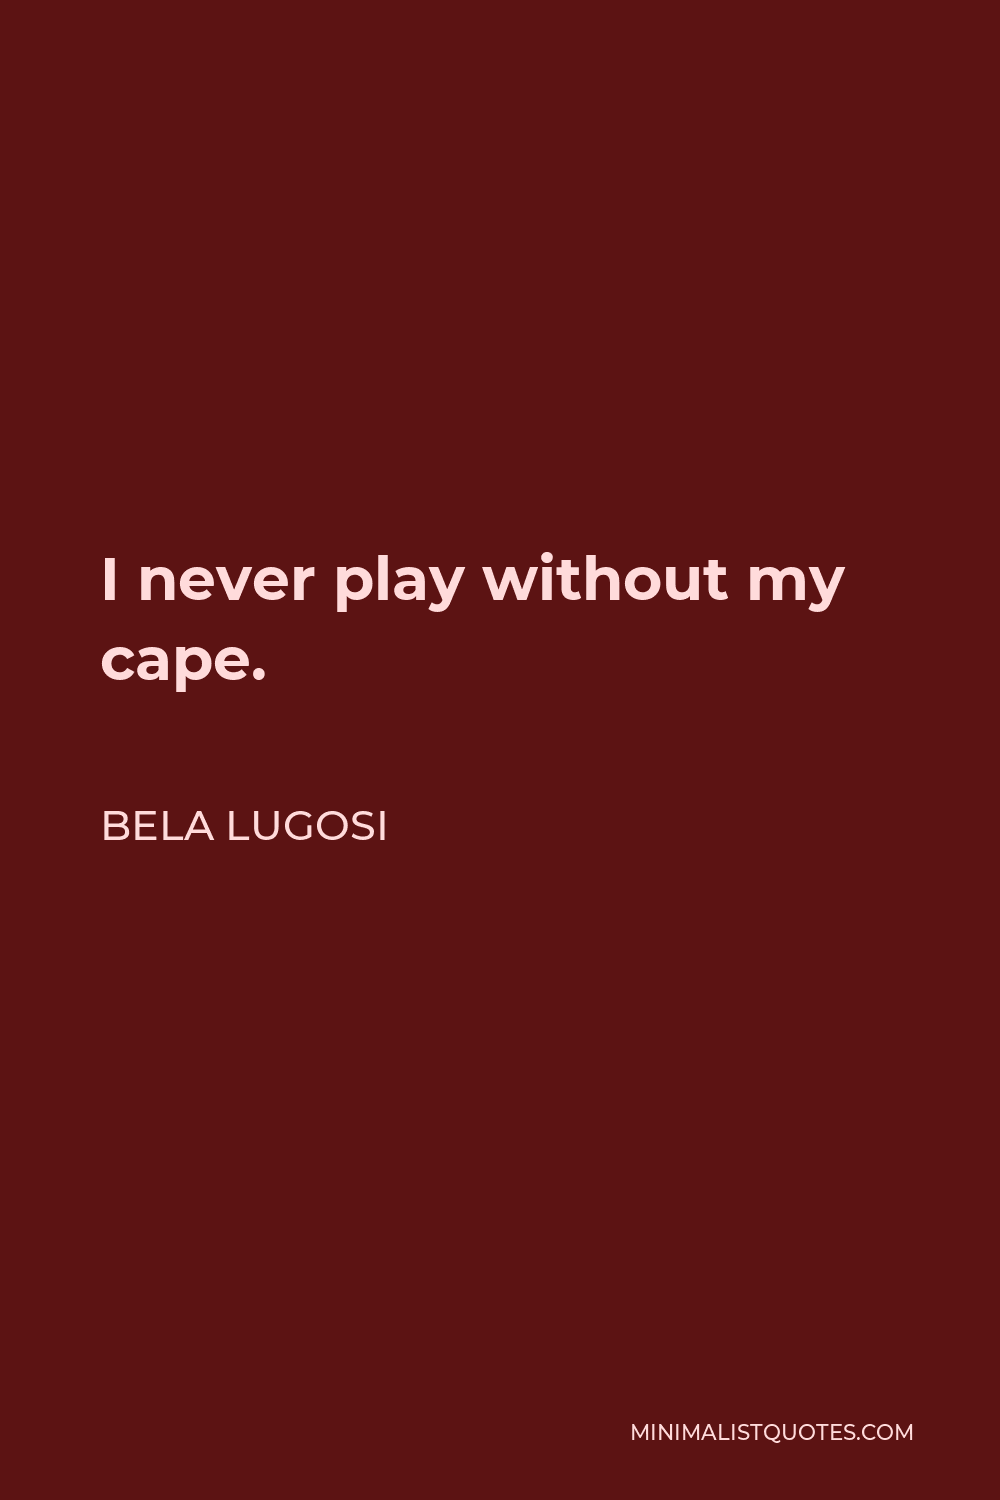 Bela Lugosi Quote - I never play without my cape.